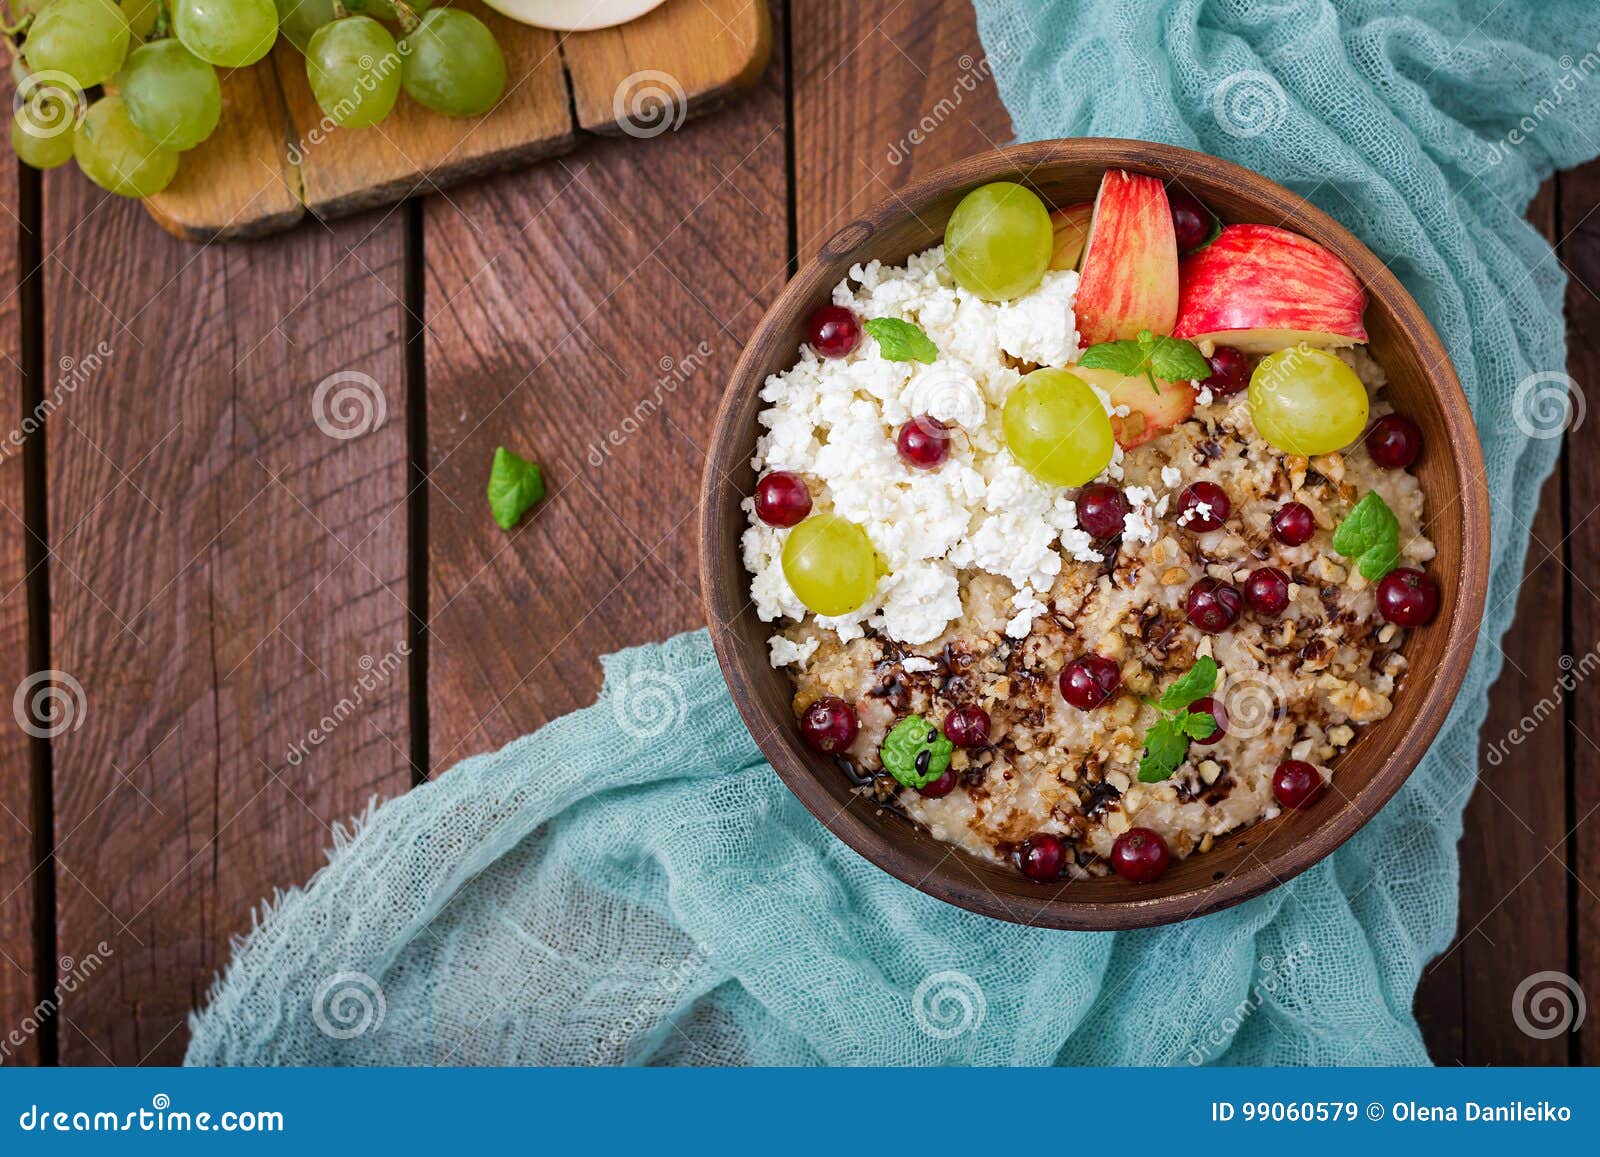 Delicious And Healthy Oatmeal With Grapes Nuts Apples And